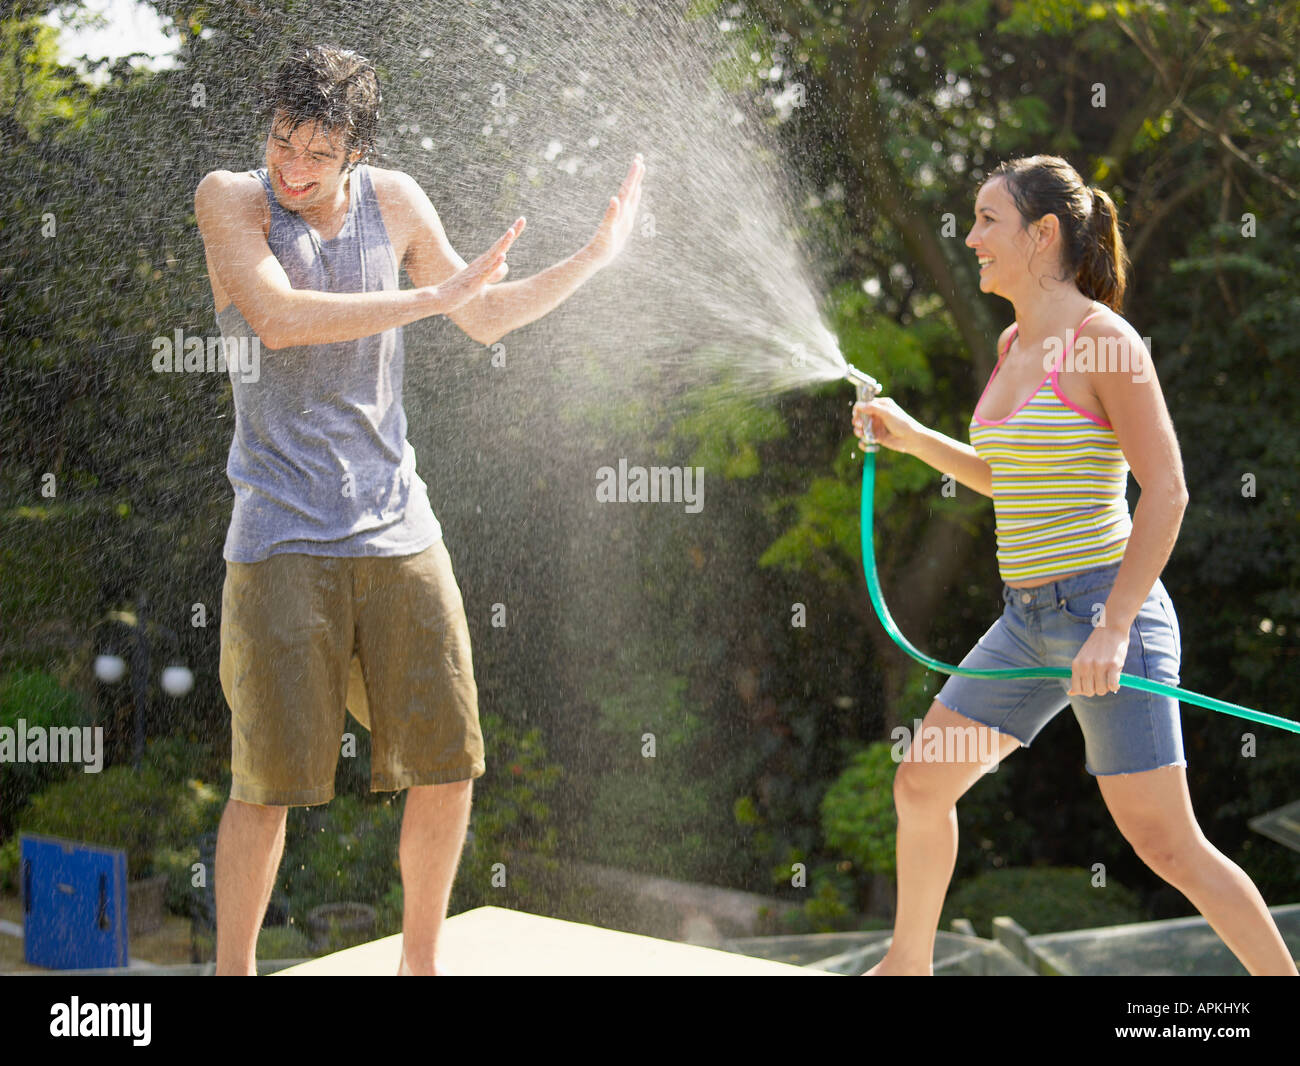 Young couple playing with water hose Stock Photo